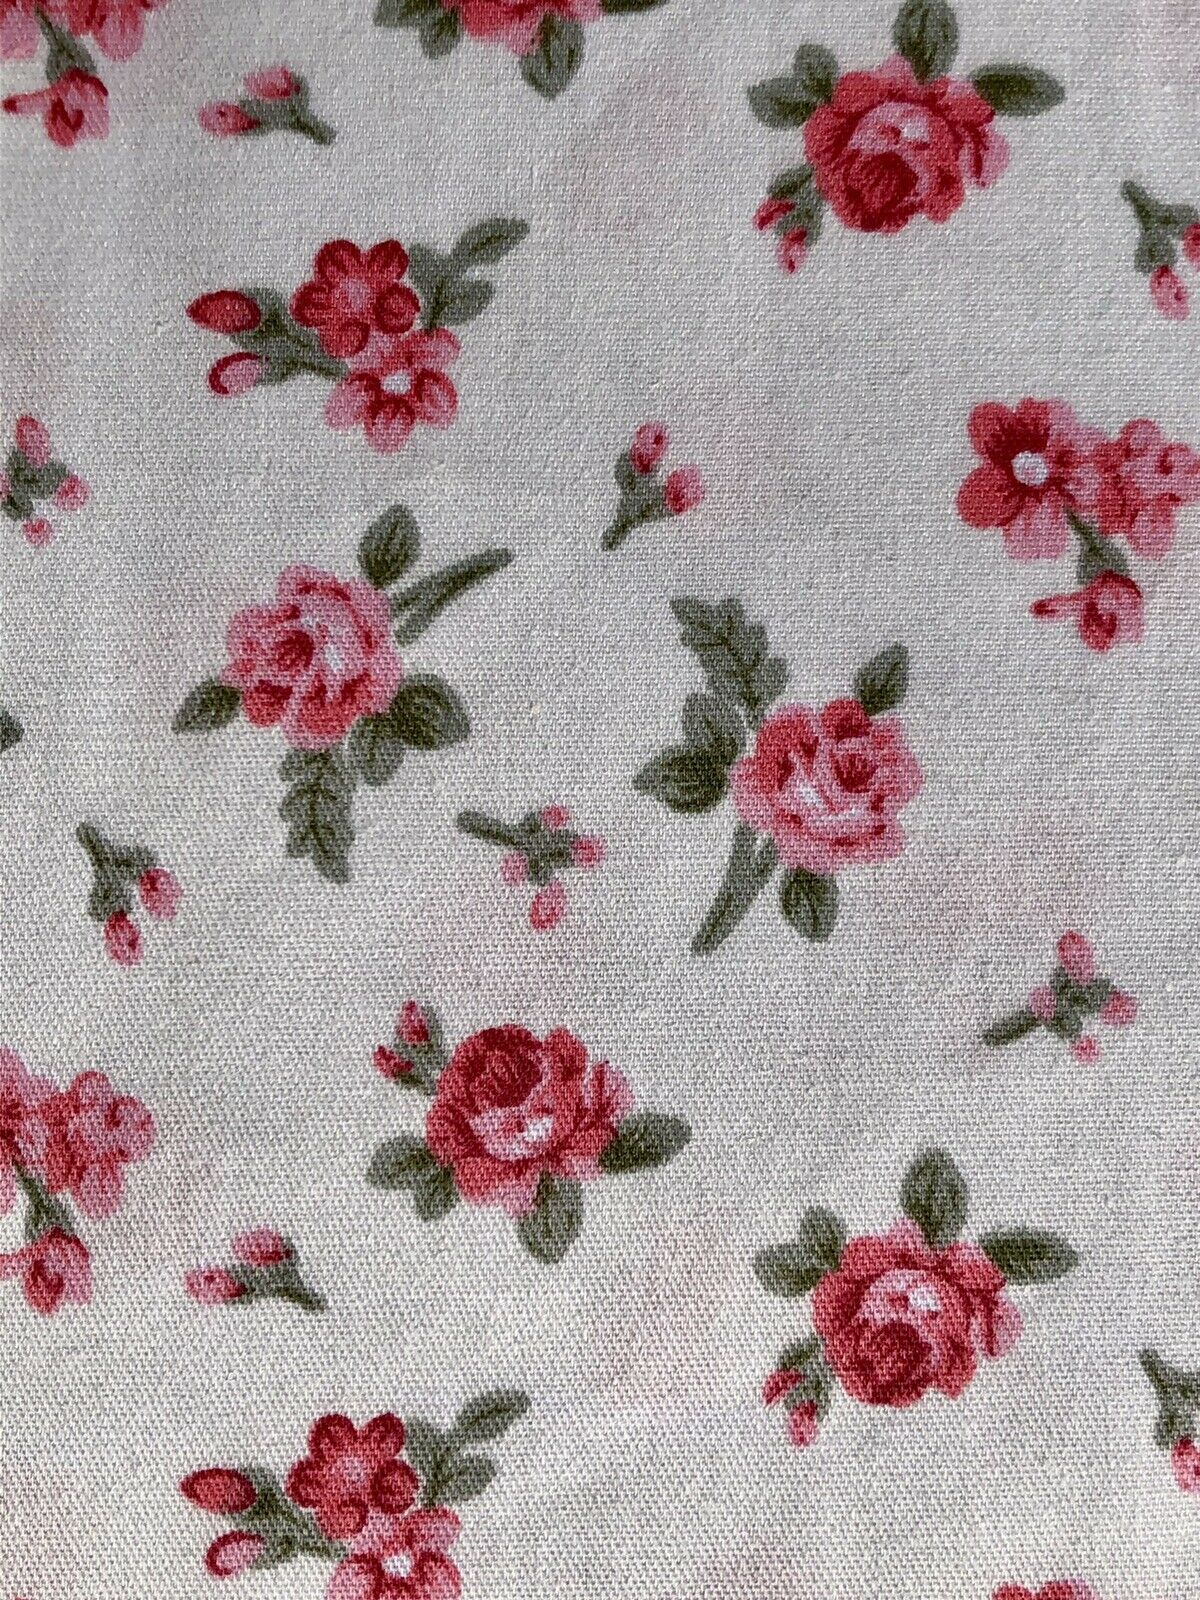 Vintage Shabby Chic Roses Cotton